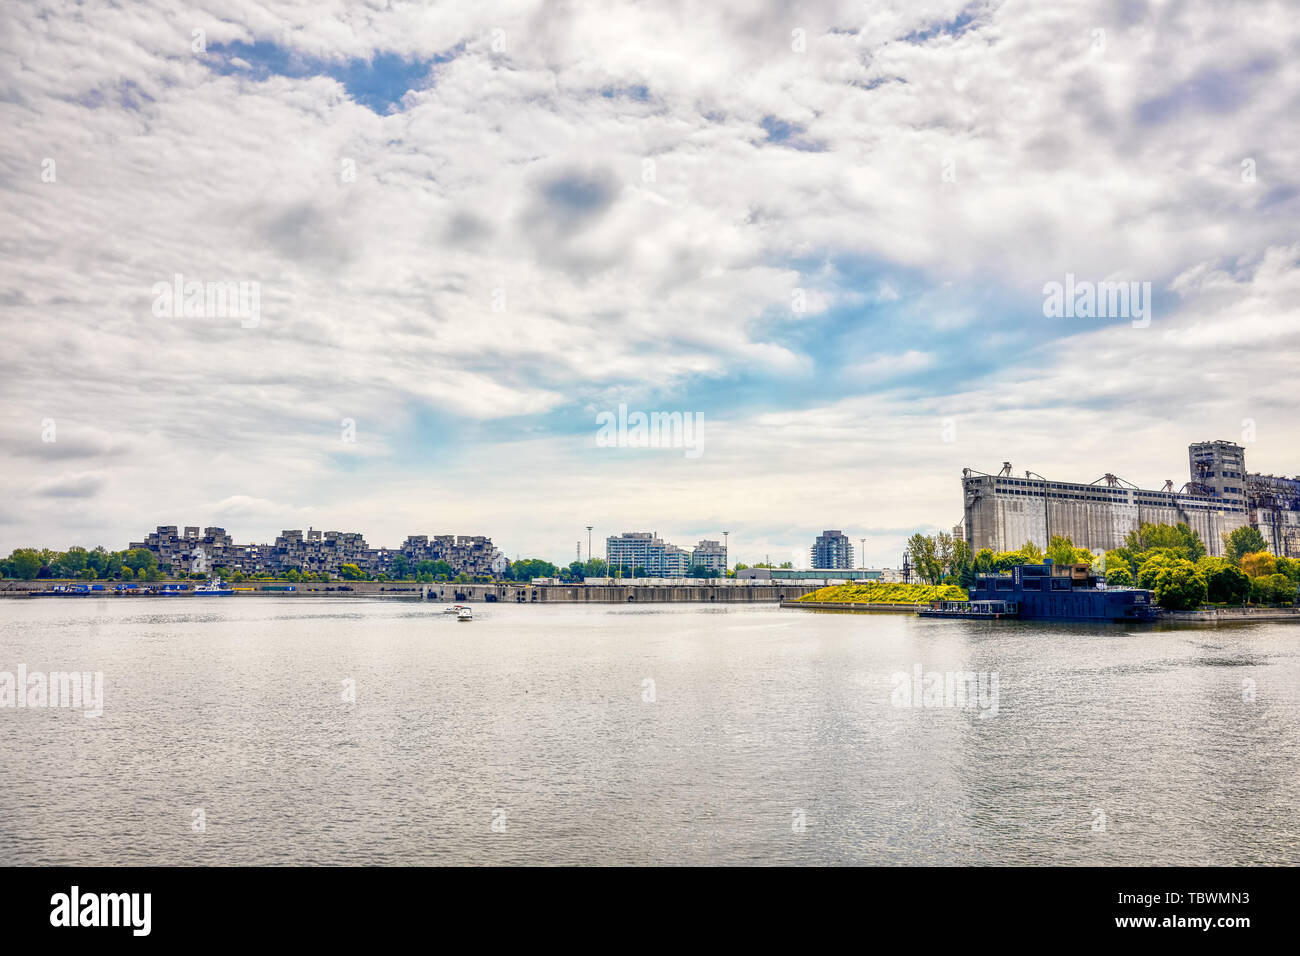 Montreal, Canada - June, 2018: Old port, saint lawrence river, Bota bota spa and historical grain factory silo No.5 in Montreal, Quebec, Canada. Edito Stock Photo